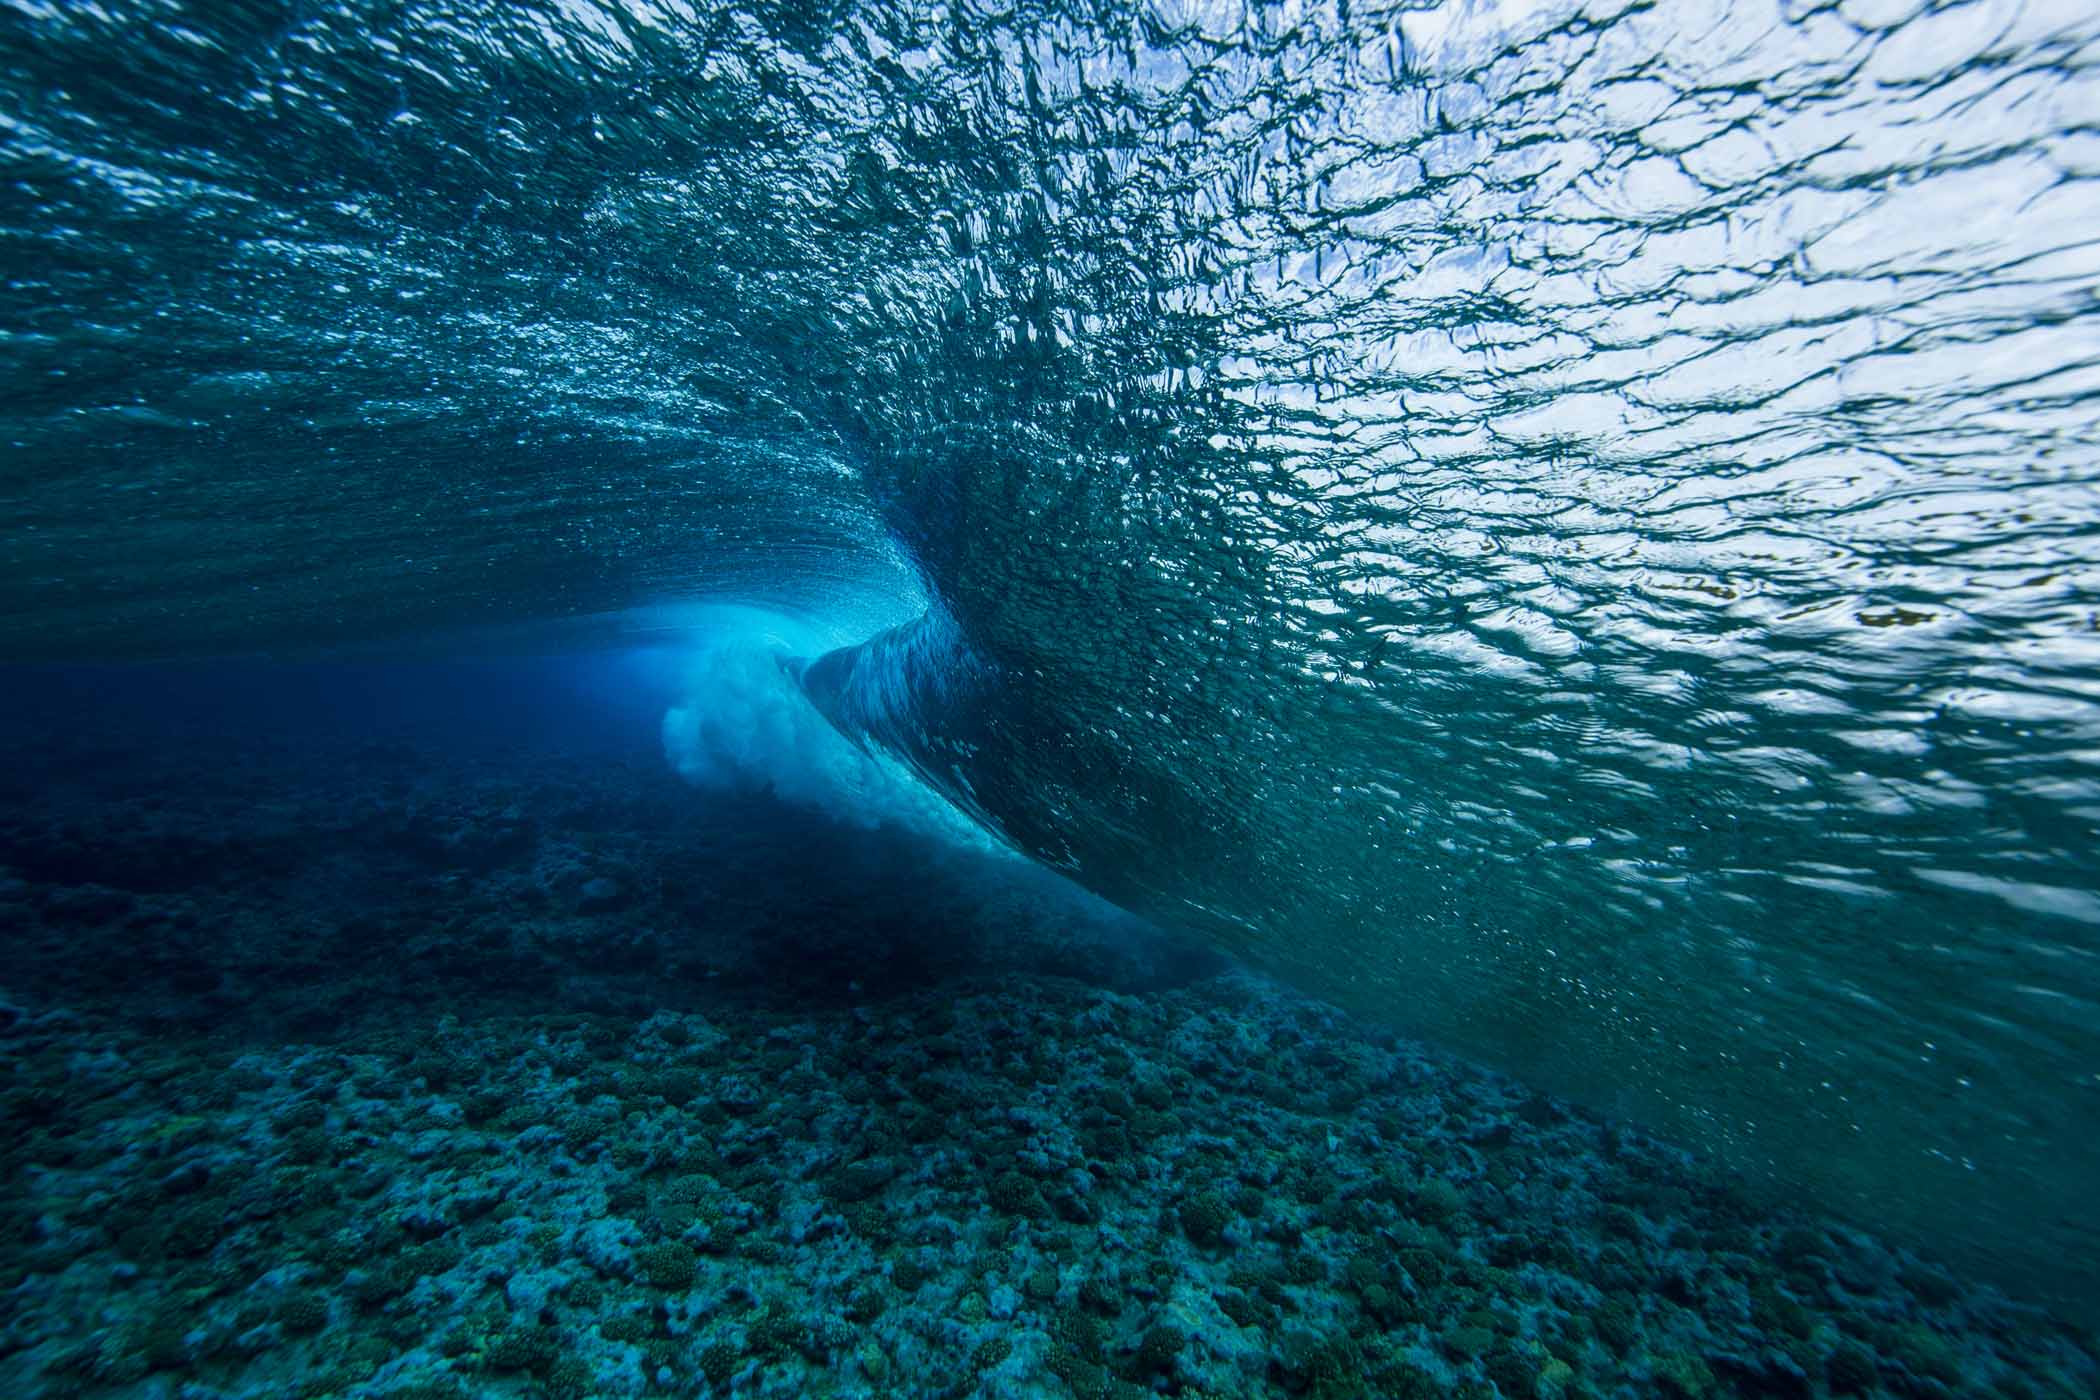 Underwater somewhere deep in the South Pacific. Photo: Glaser.